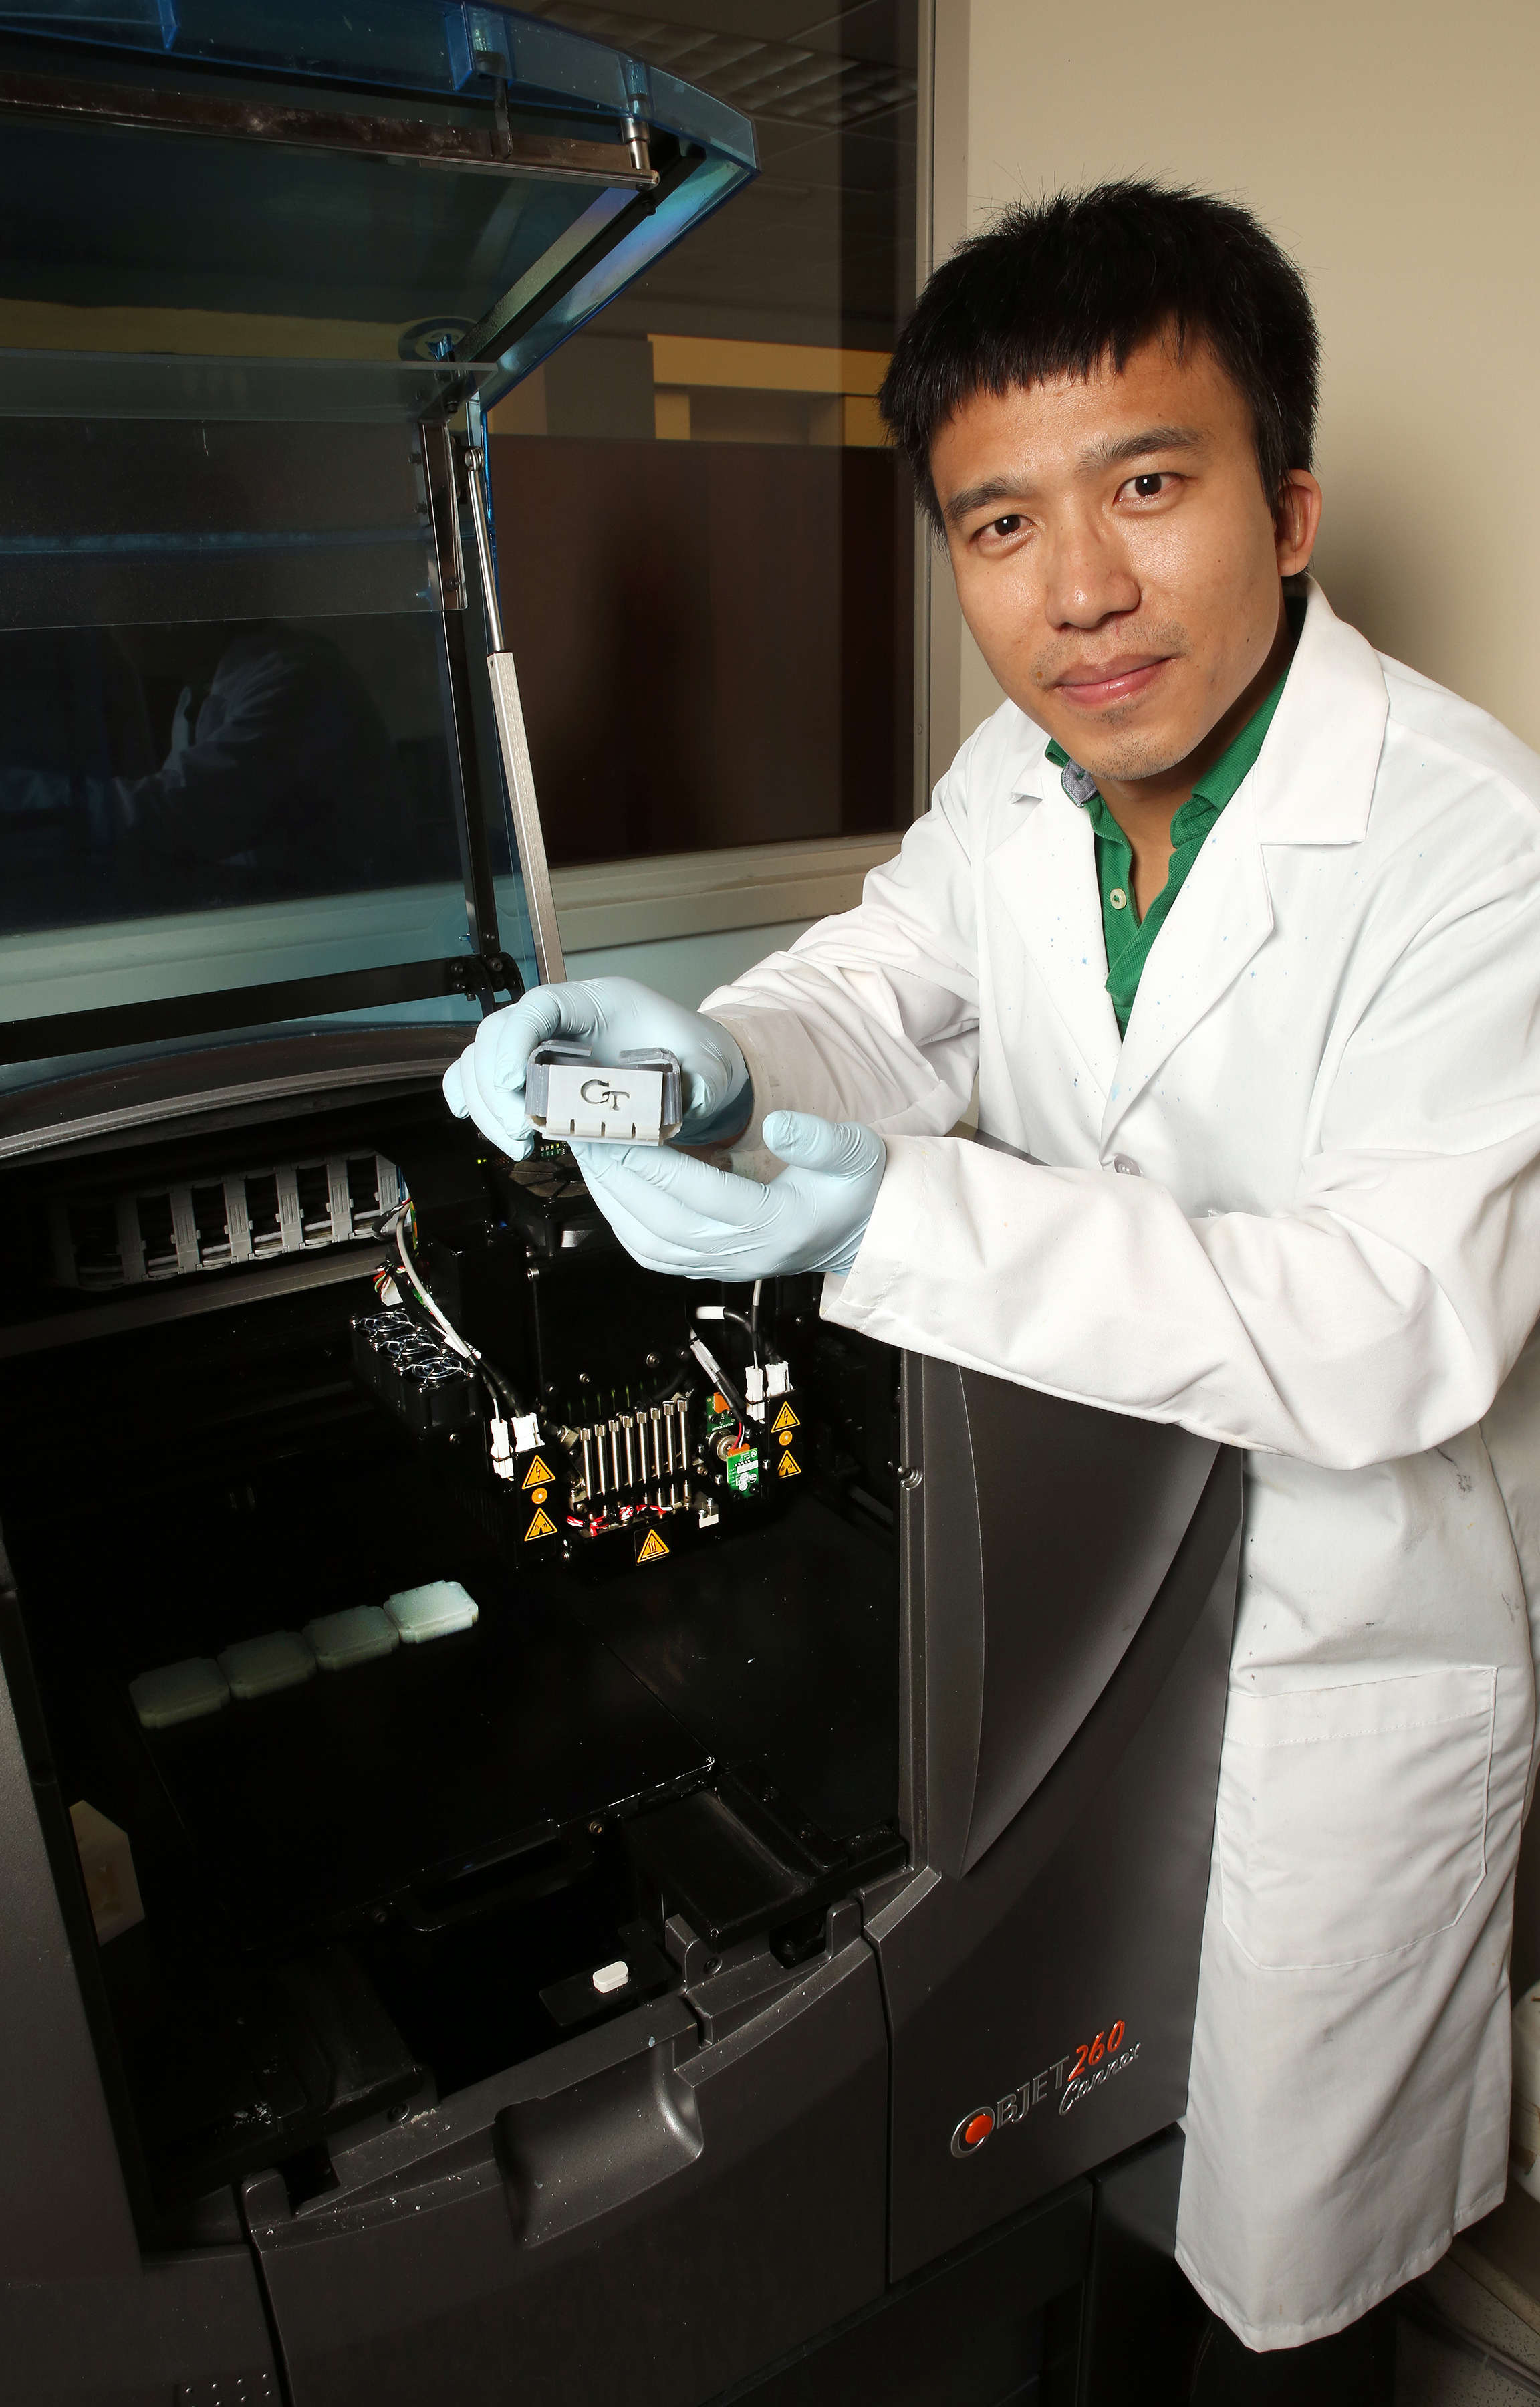 Yiqi Mao, a postdoctoral fellow in the laboratory of Professor Jerry Qi at Georgia Tech, shows a folded box structure produced from smart shape-memory materials. The materials were created with the 3-D printer shown with him. (Credit: Candler Hobbs, Georgia Tech)